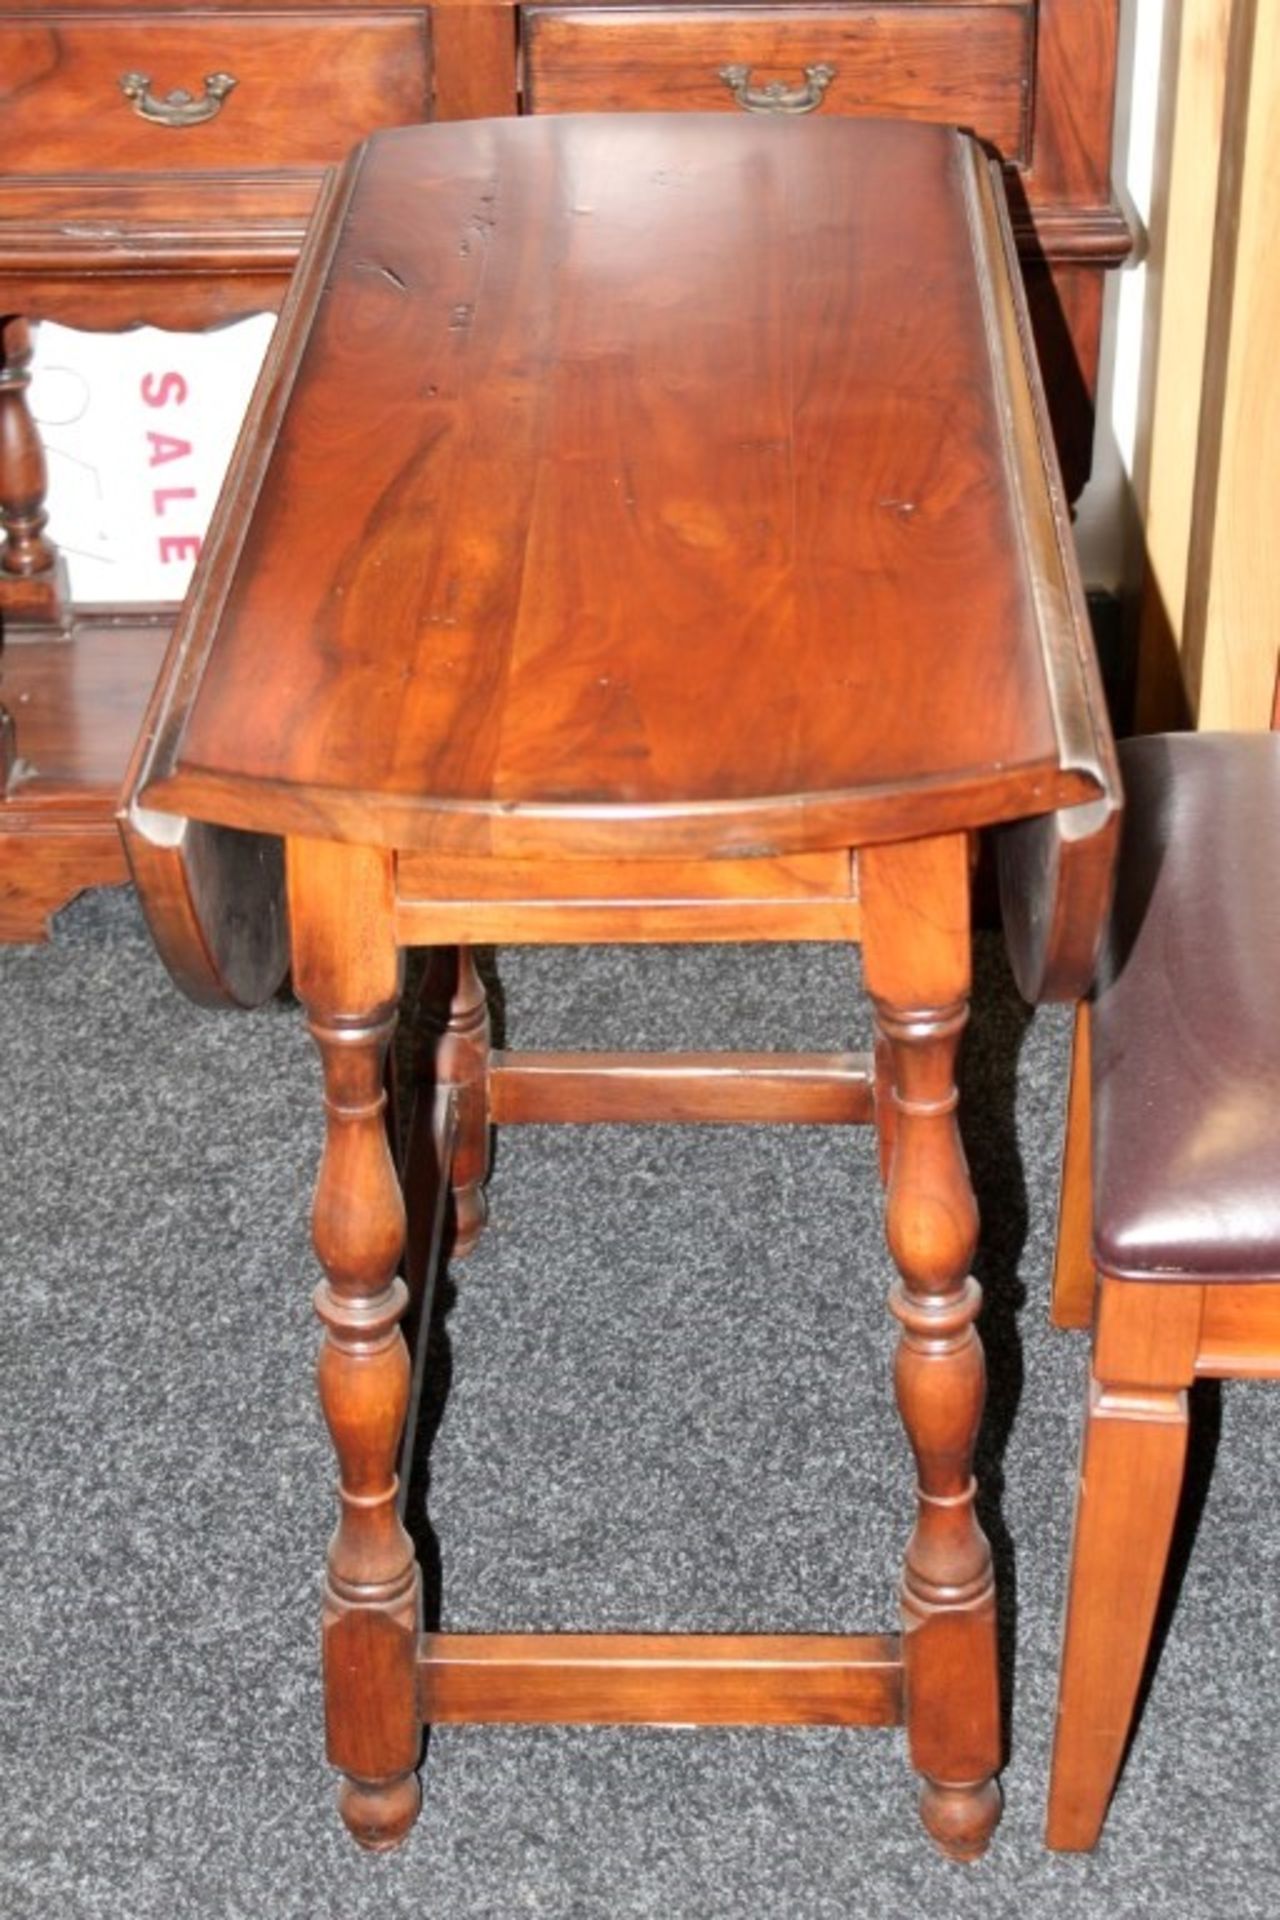 1 x Mark Webster "Burlington" Solid Wood Gate Leg Extending Table With 2-Drawers + 2-Folds - Diamete - Image 8 of 14